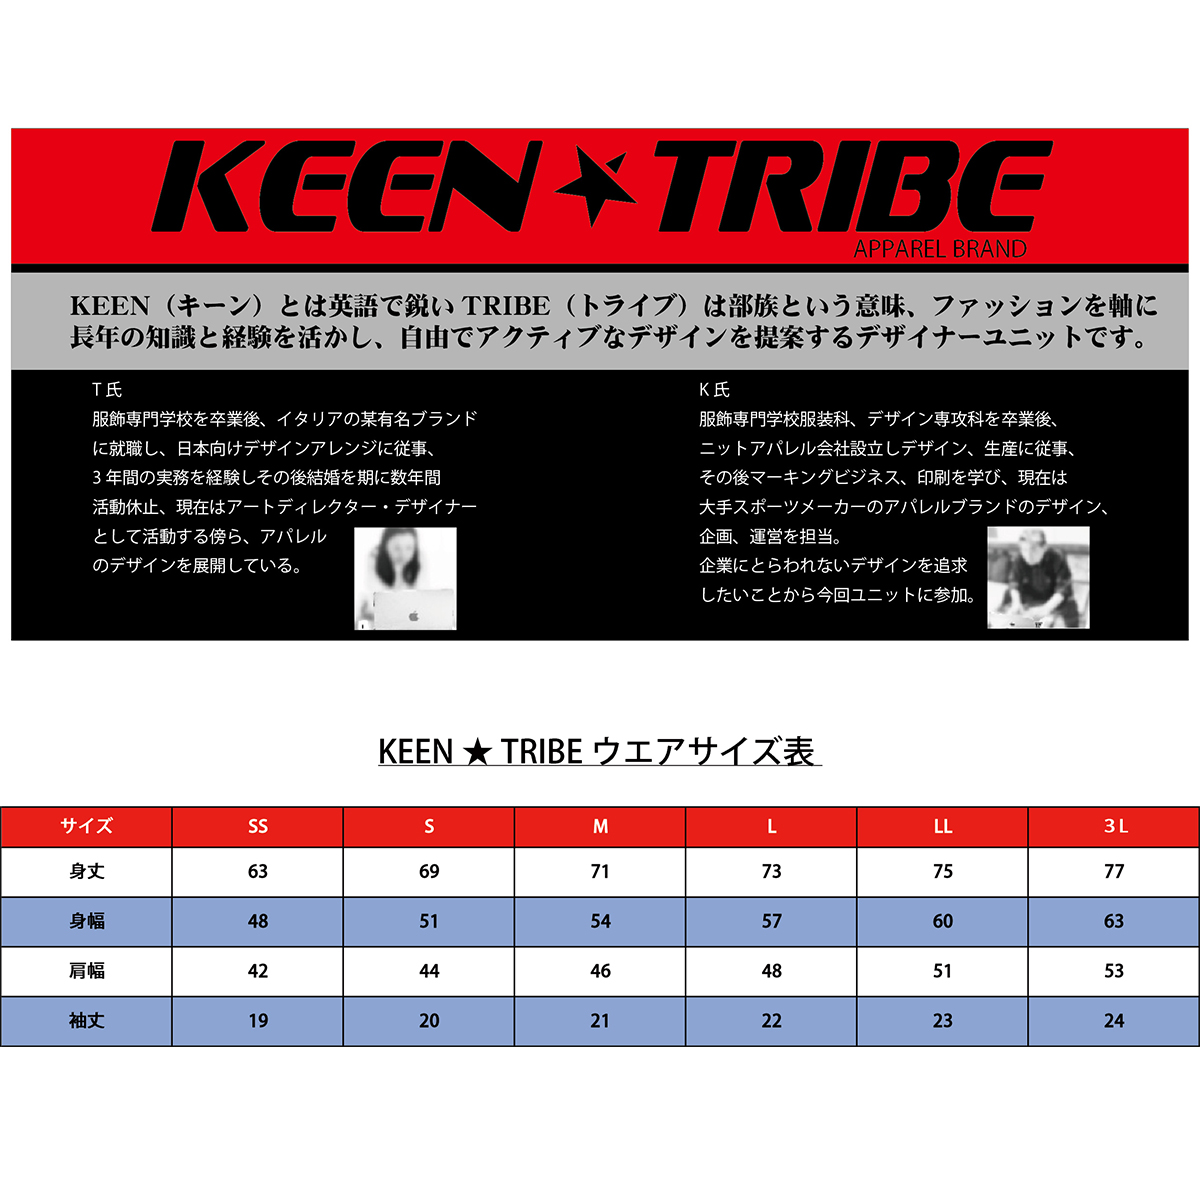 KEEN ★ TRIBE　KT-80(受注生産)